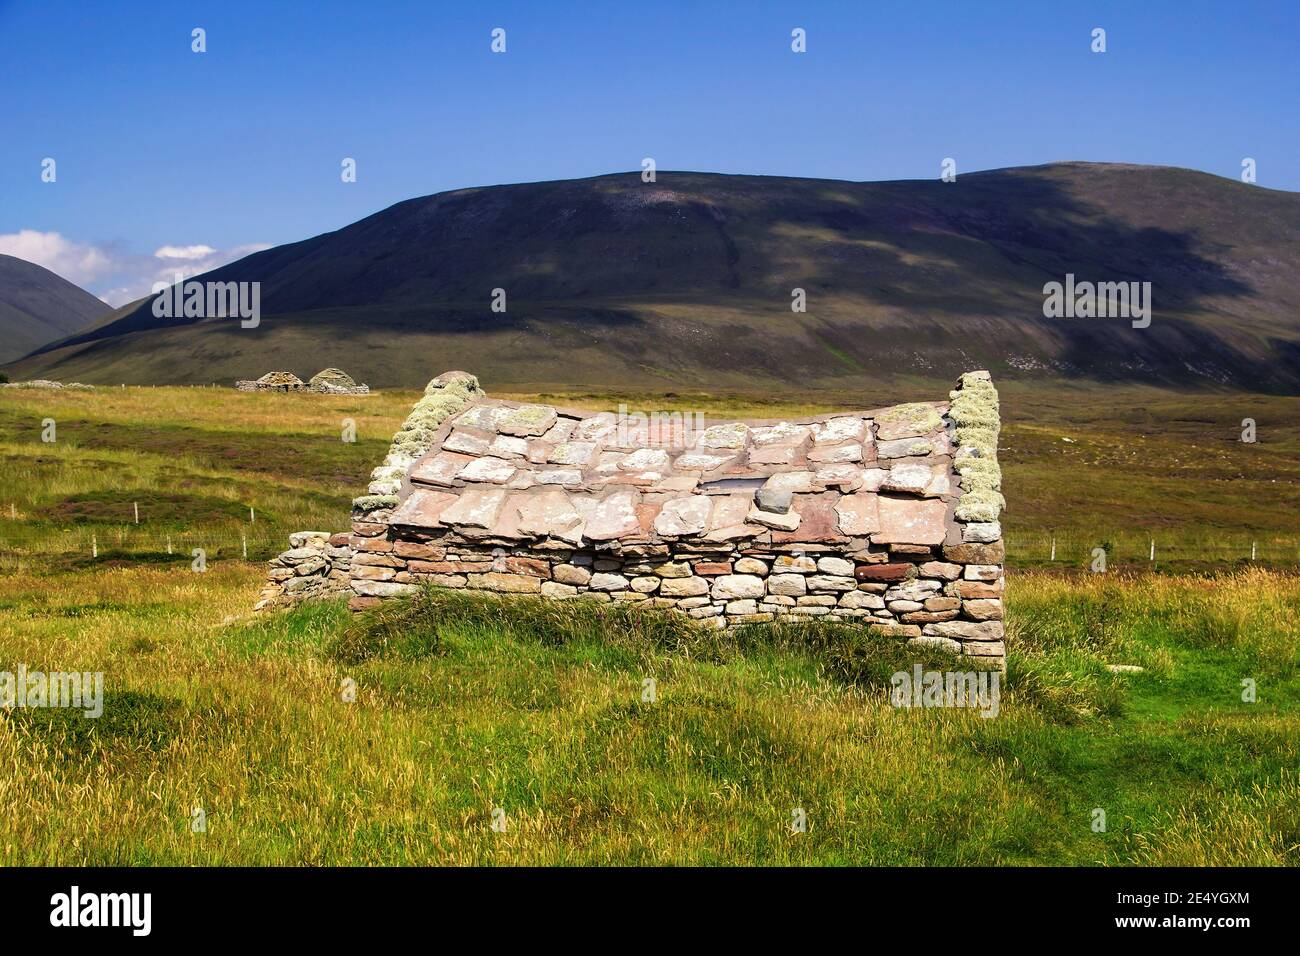 Traditional vintage scottish stone built farm house amongst green grass and dark hills in background on scottish island of Hoy on Orkney summer day Stock Photo